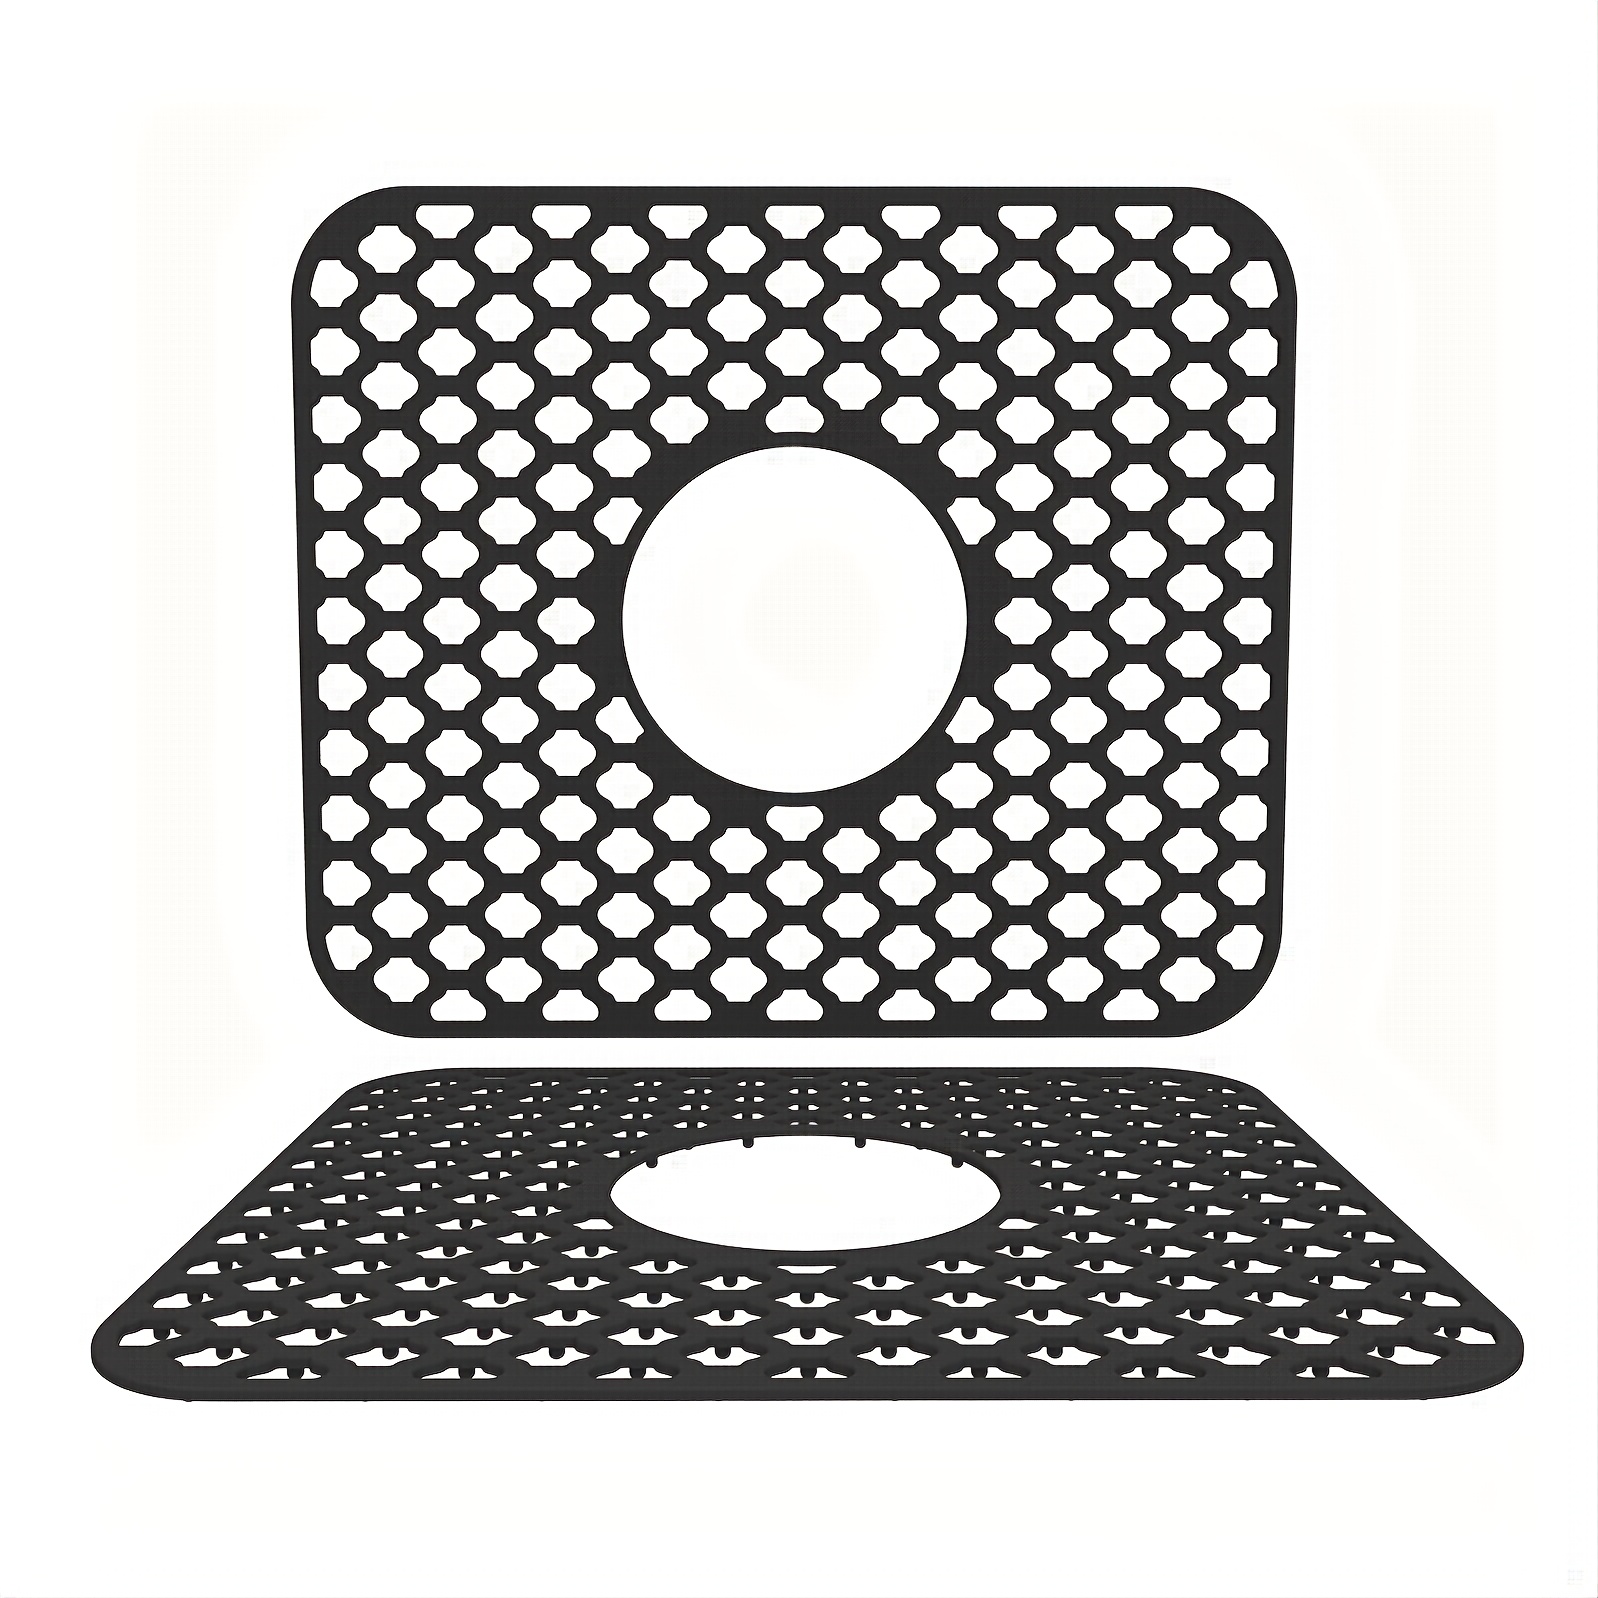 Kitchen Silicone Sink Protector Mat 28''×14'' Farmhouse Sink Protectors for  Stainless Steel Kitchen Grey Sink Grid with Rear Drain